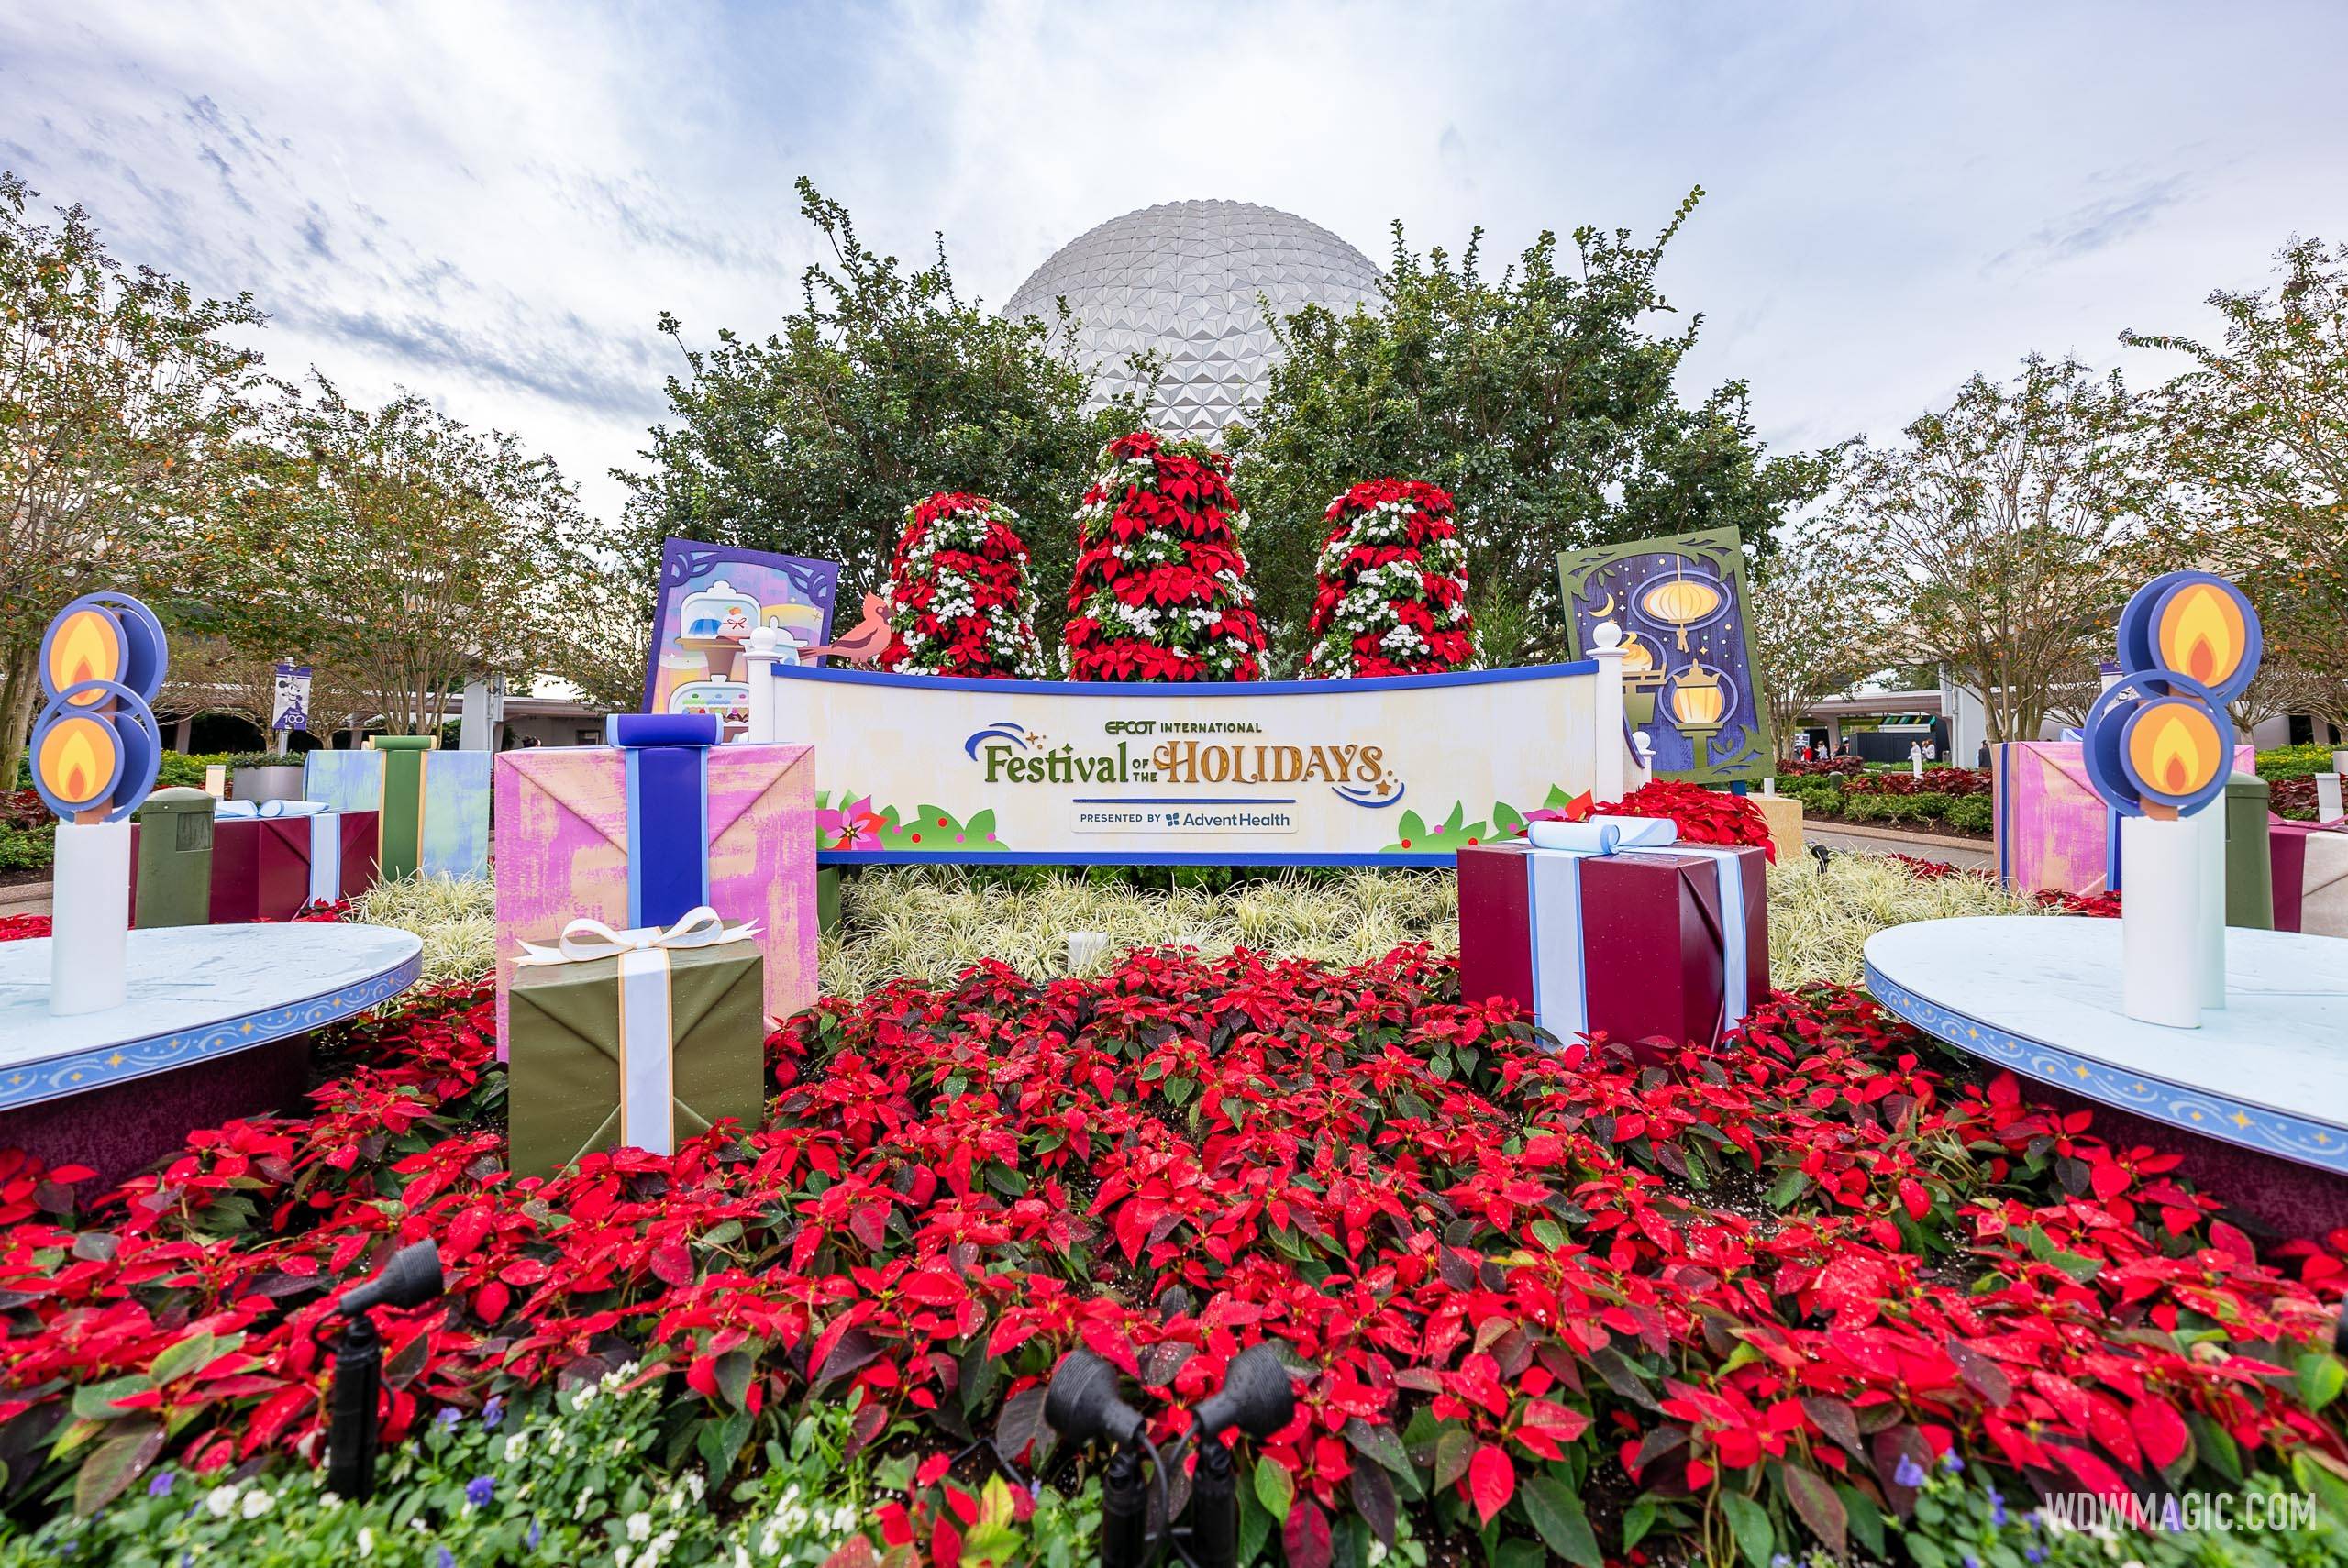 Full Holiday Storyteller line-up and times for the 2023 EPCOT International Festival of the Holidays